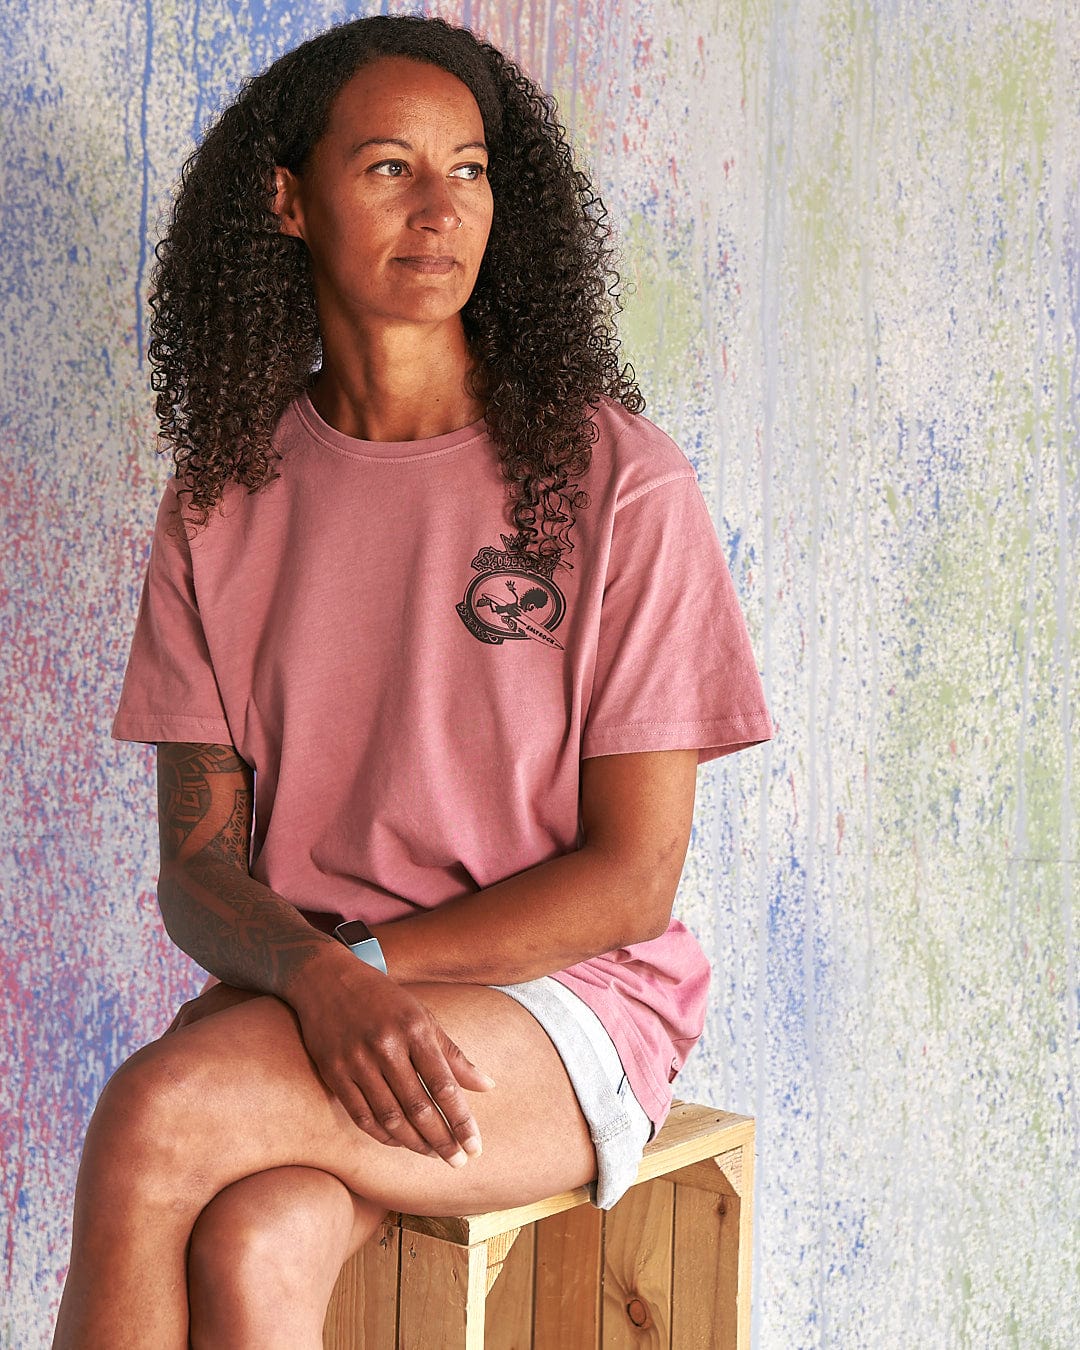 A woman wearing a Saltrock Heraldic Tok - Limited Edition 35 Years T-Shirt sitting on a wooden box.